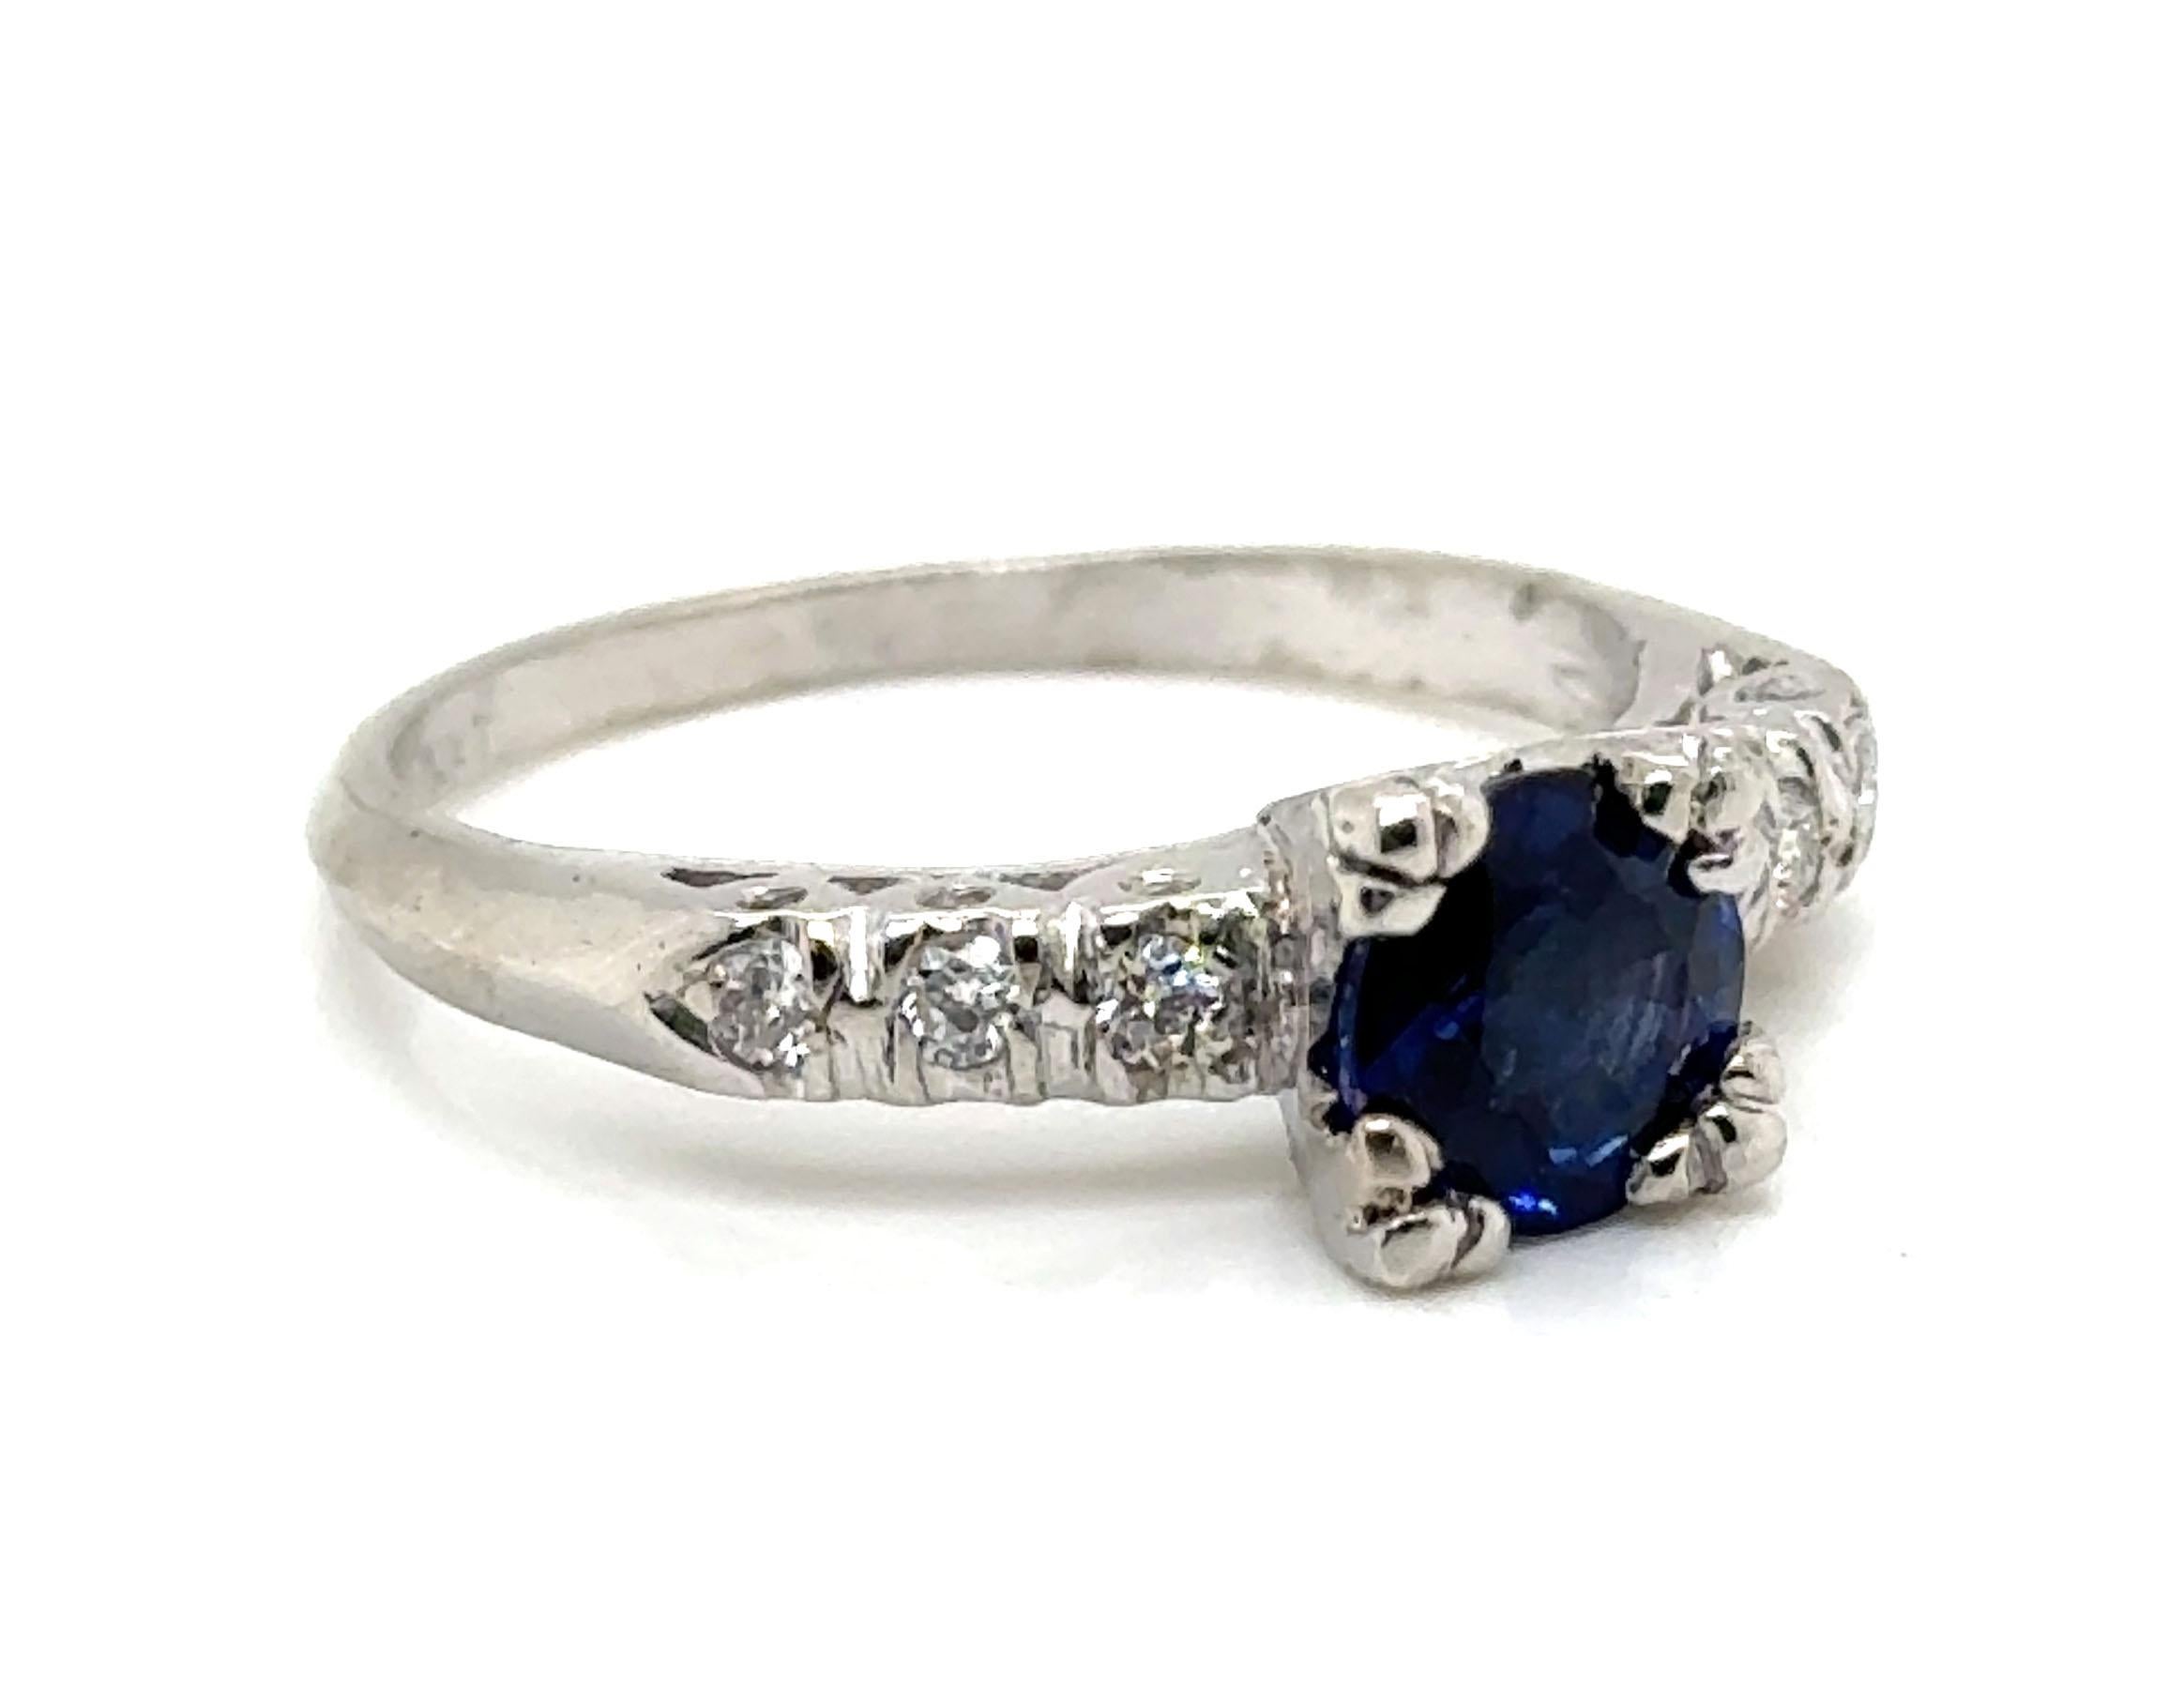 Genuine Original Art Deco Antique from 1930's Sapphire and Diamond Ring 1.40ct Vintage Platinum


Showcases a Stunning 1.20ct Genuine Natural Blue Round Sapphire at its Center

Simplicity of its Design is Captivating

Complemented by Six Genuine